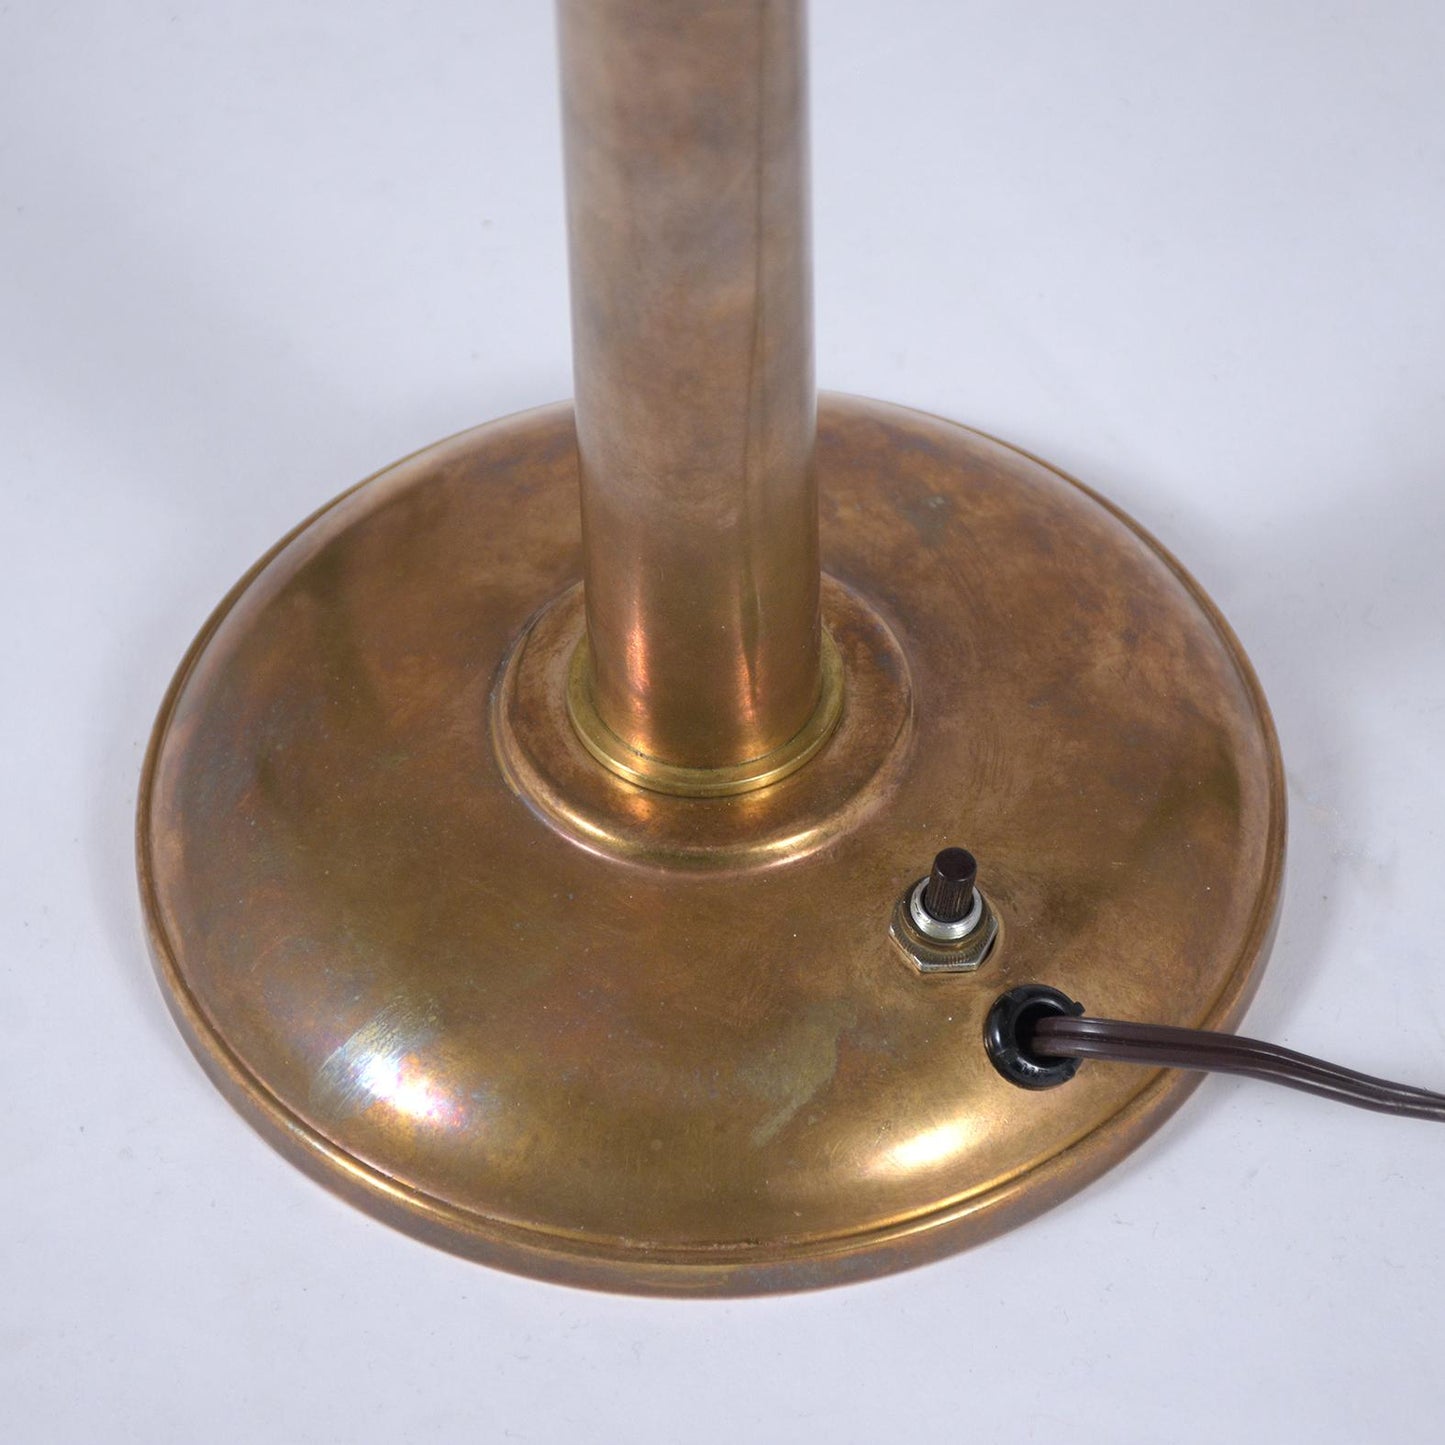 1970's Mid-Century Modern Copper Table Lamp